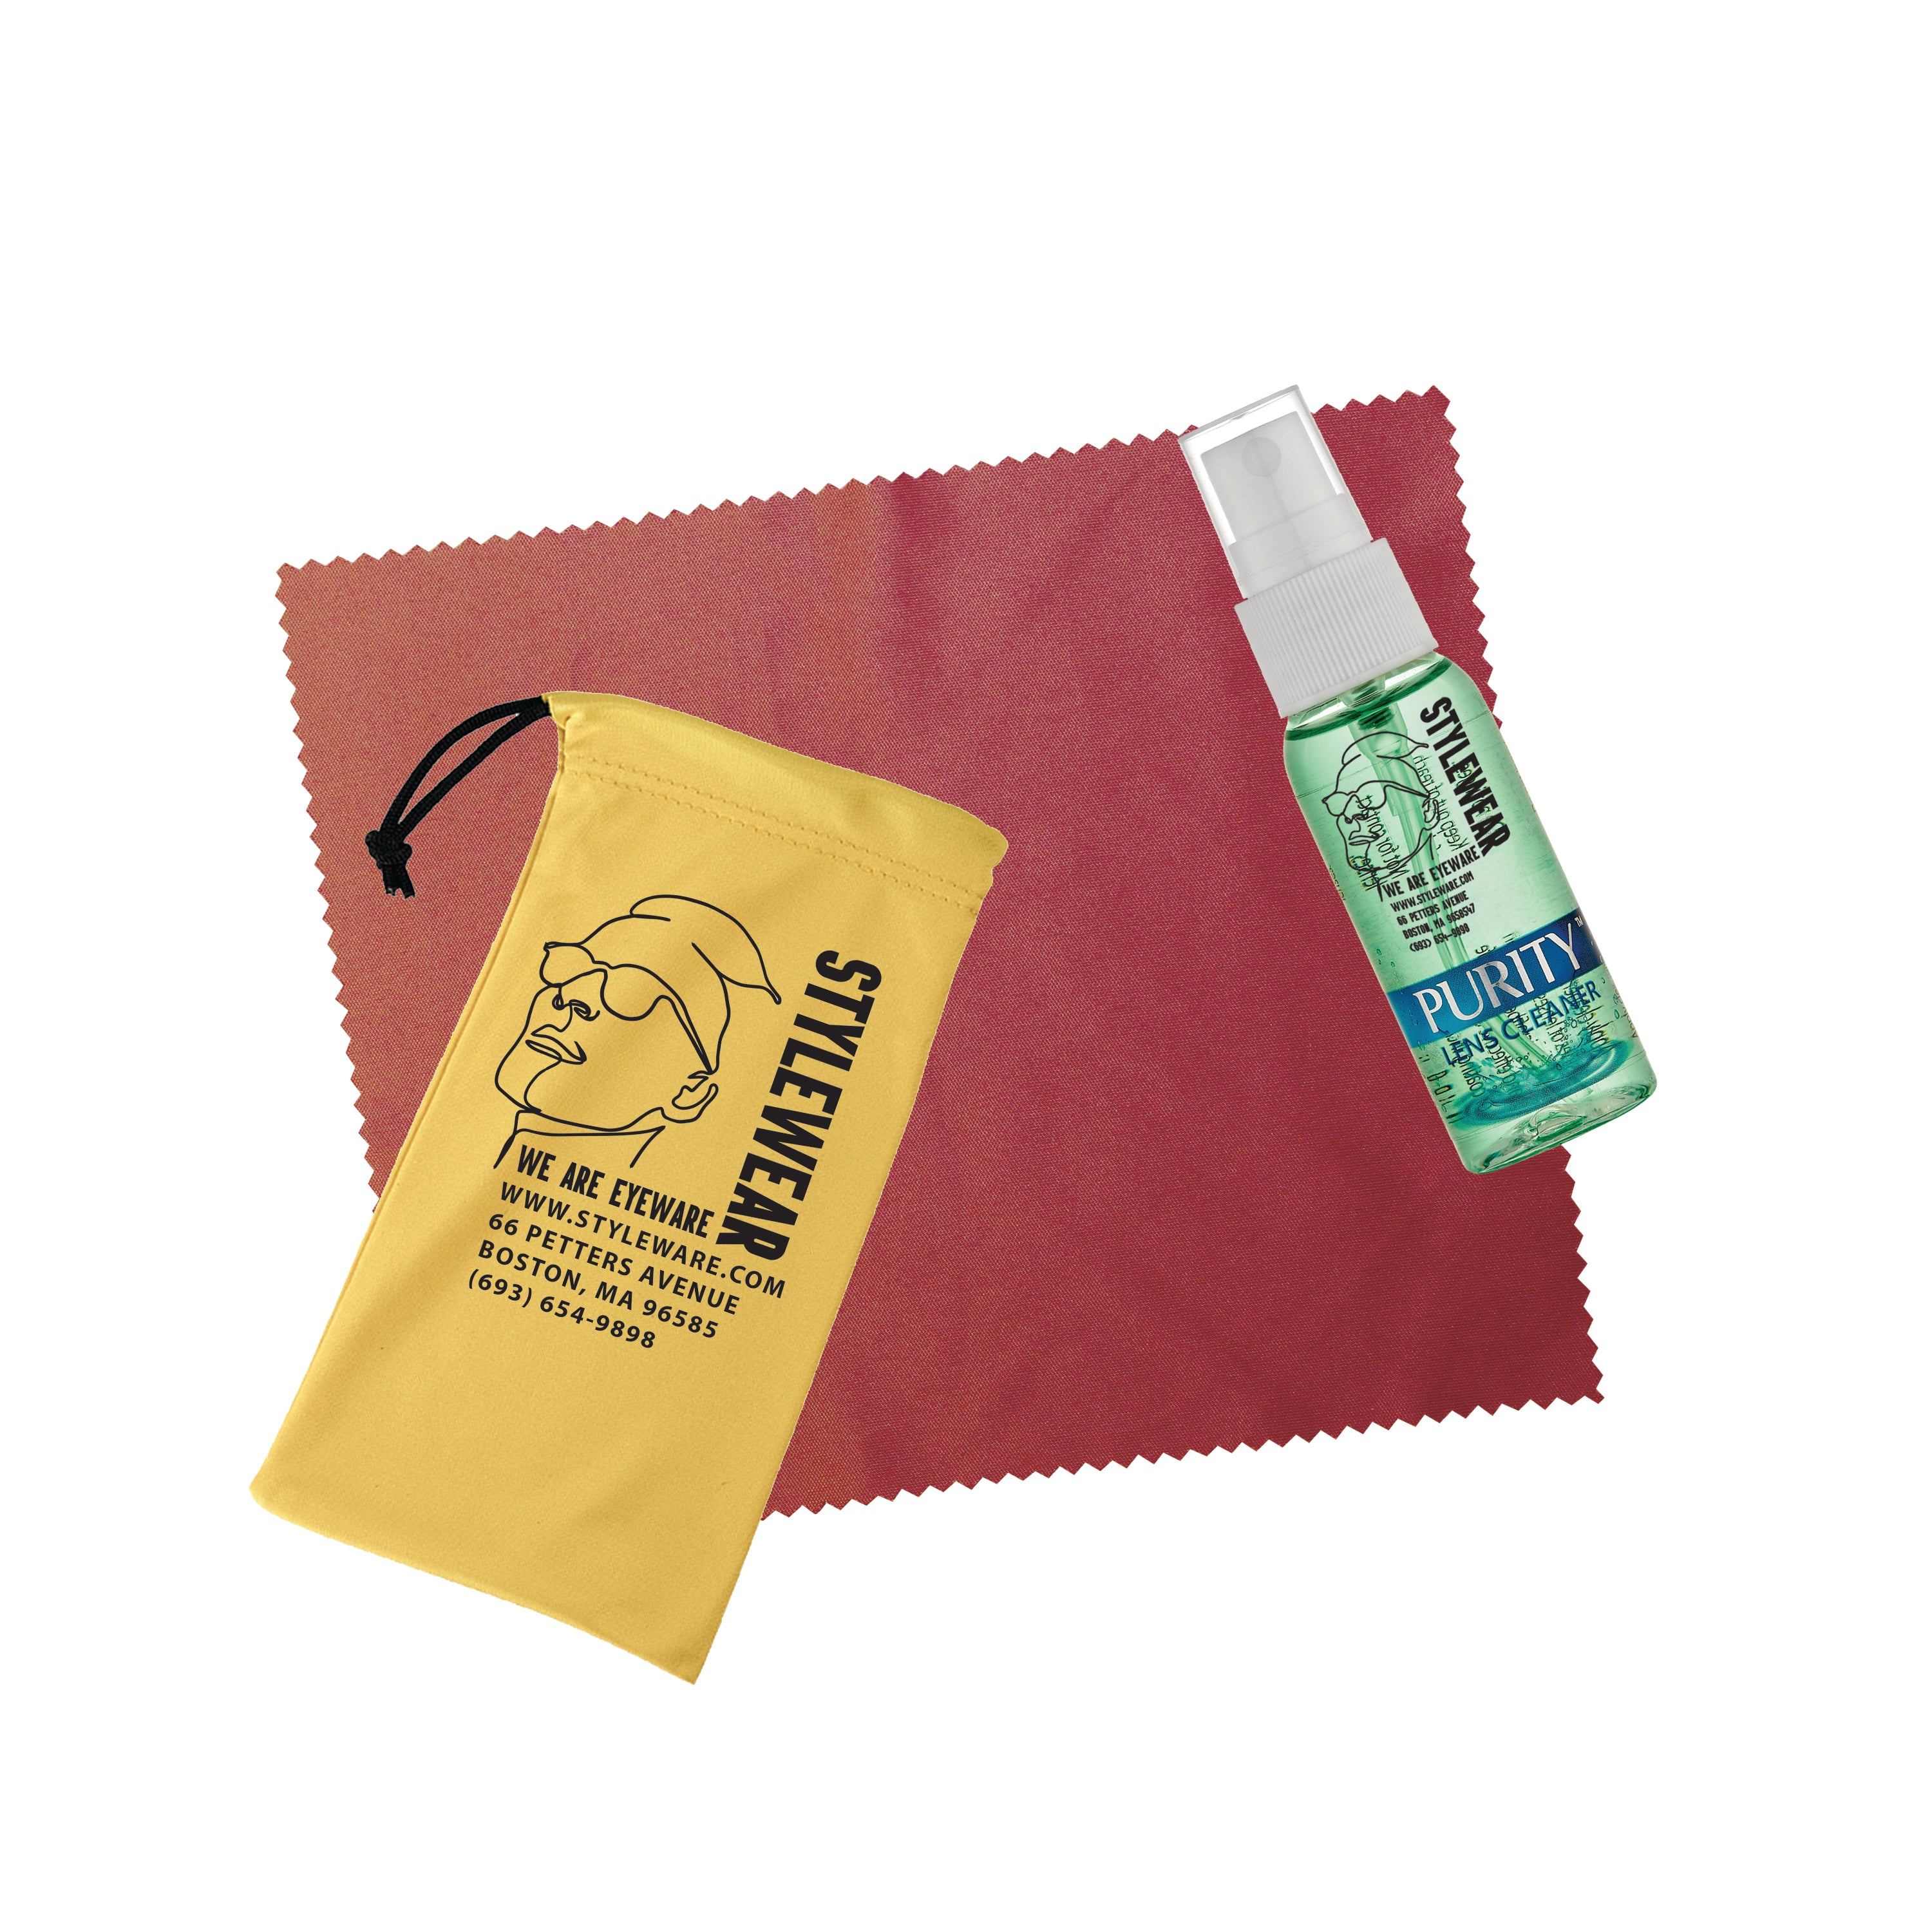 1 oz. Purity™ Imprinted Pouch Kits